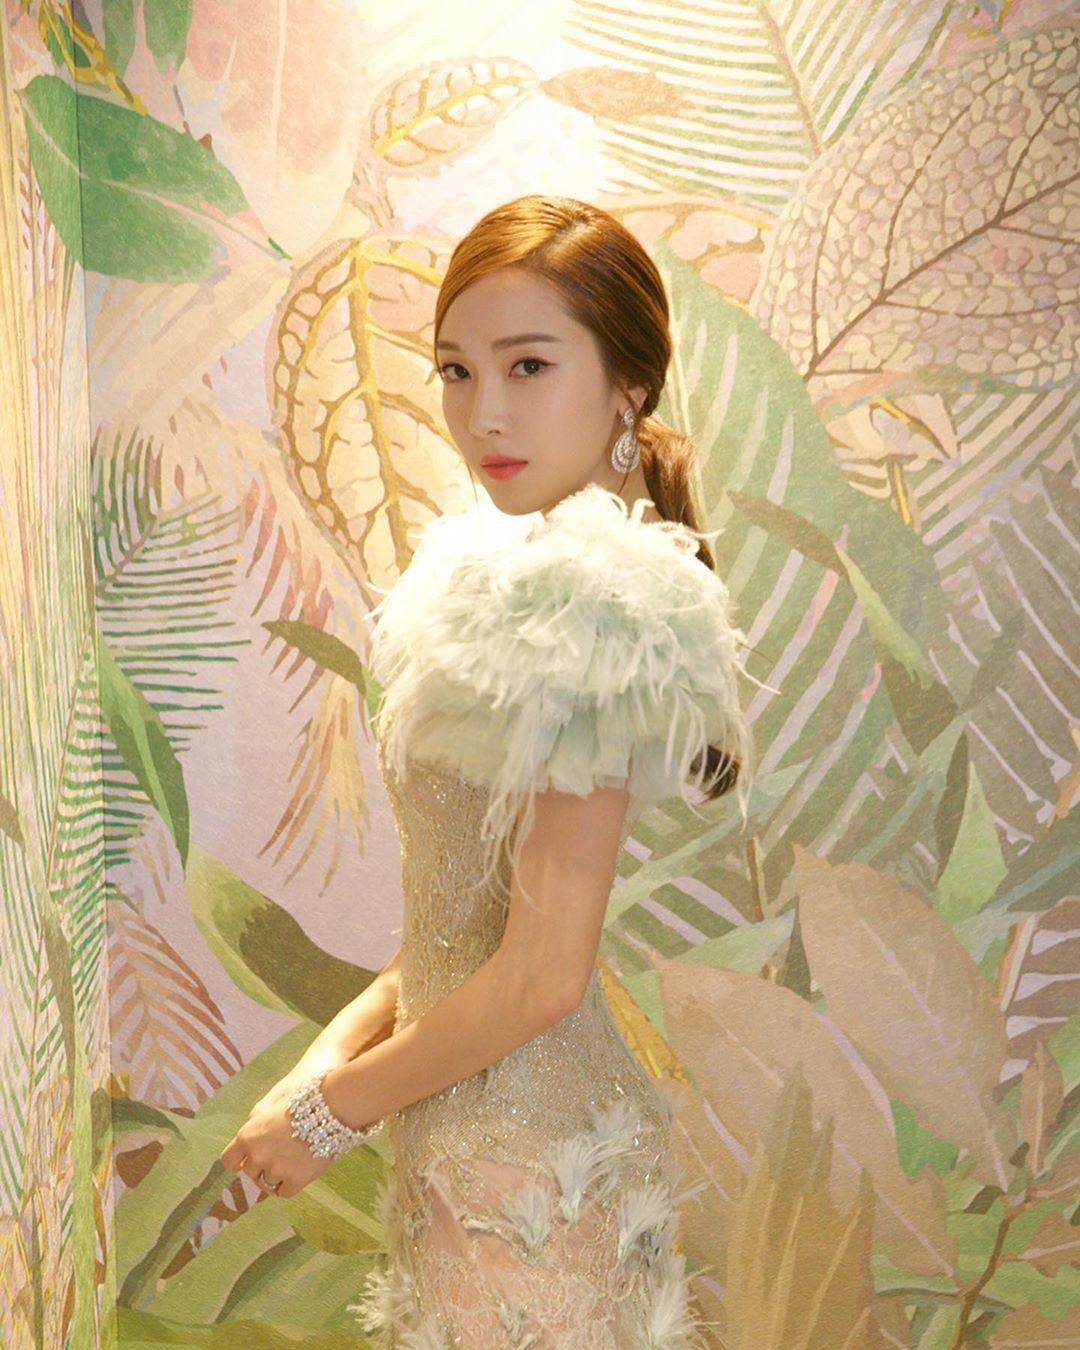 K-pop star and actress Jessica Jung has been turning heads on the fashion front lately. Here, she is wearing Ralph & Russo and Chopard jewellery. Photo: Instagram